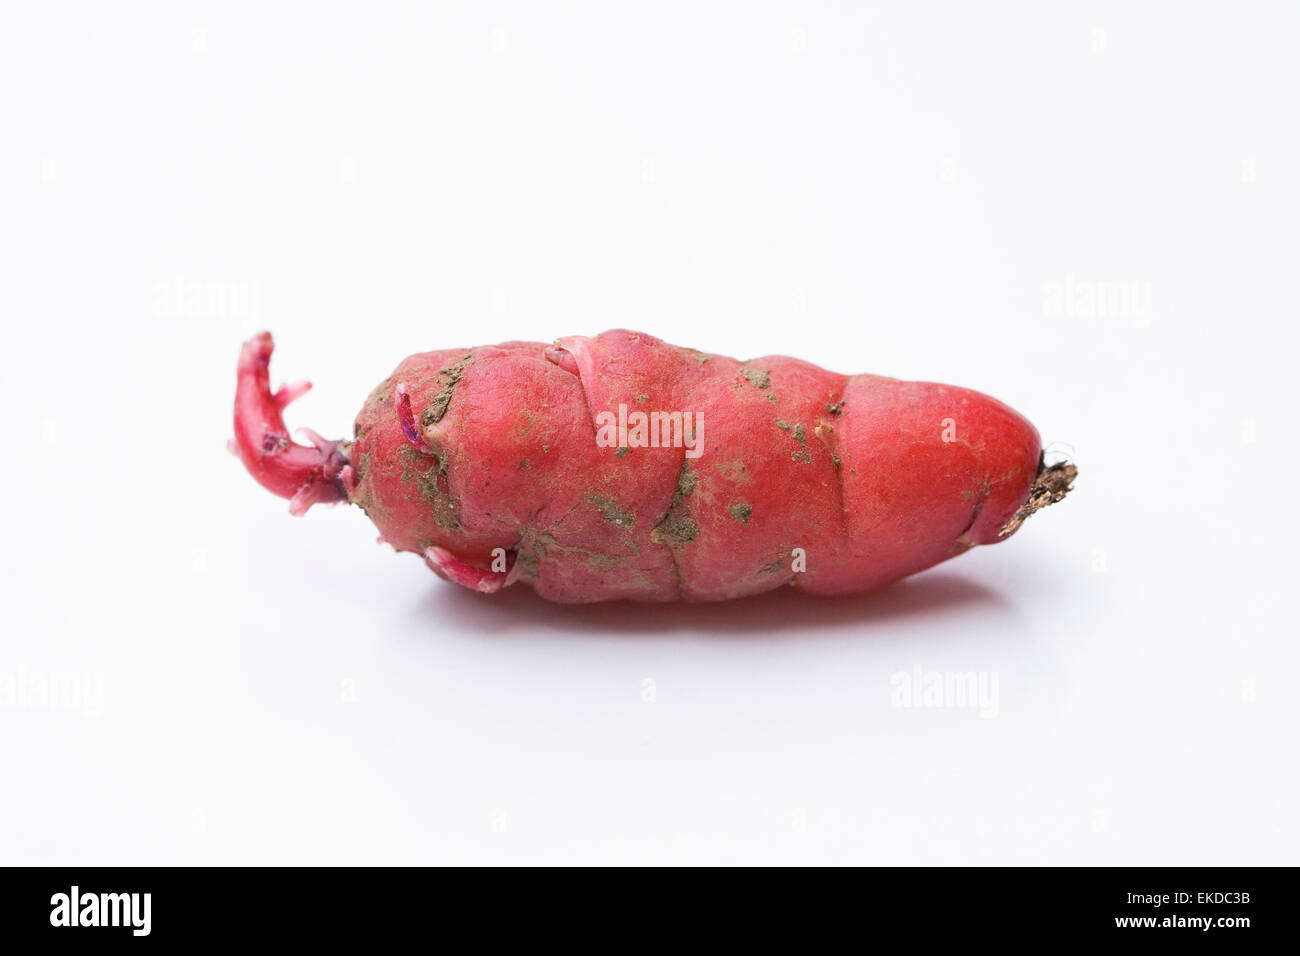 Oxalis tuberosa. A single red New Zealand yam seed tuber ready for planting. Stock Photo